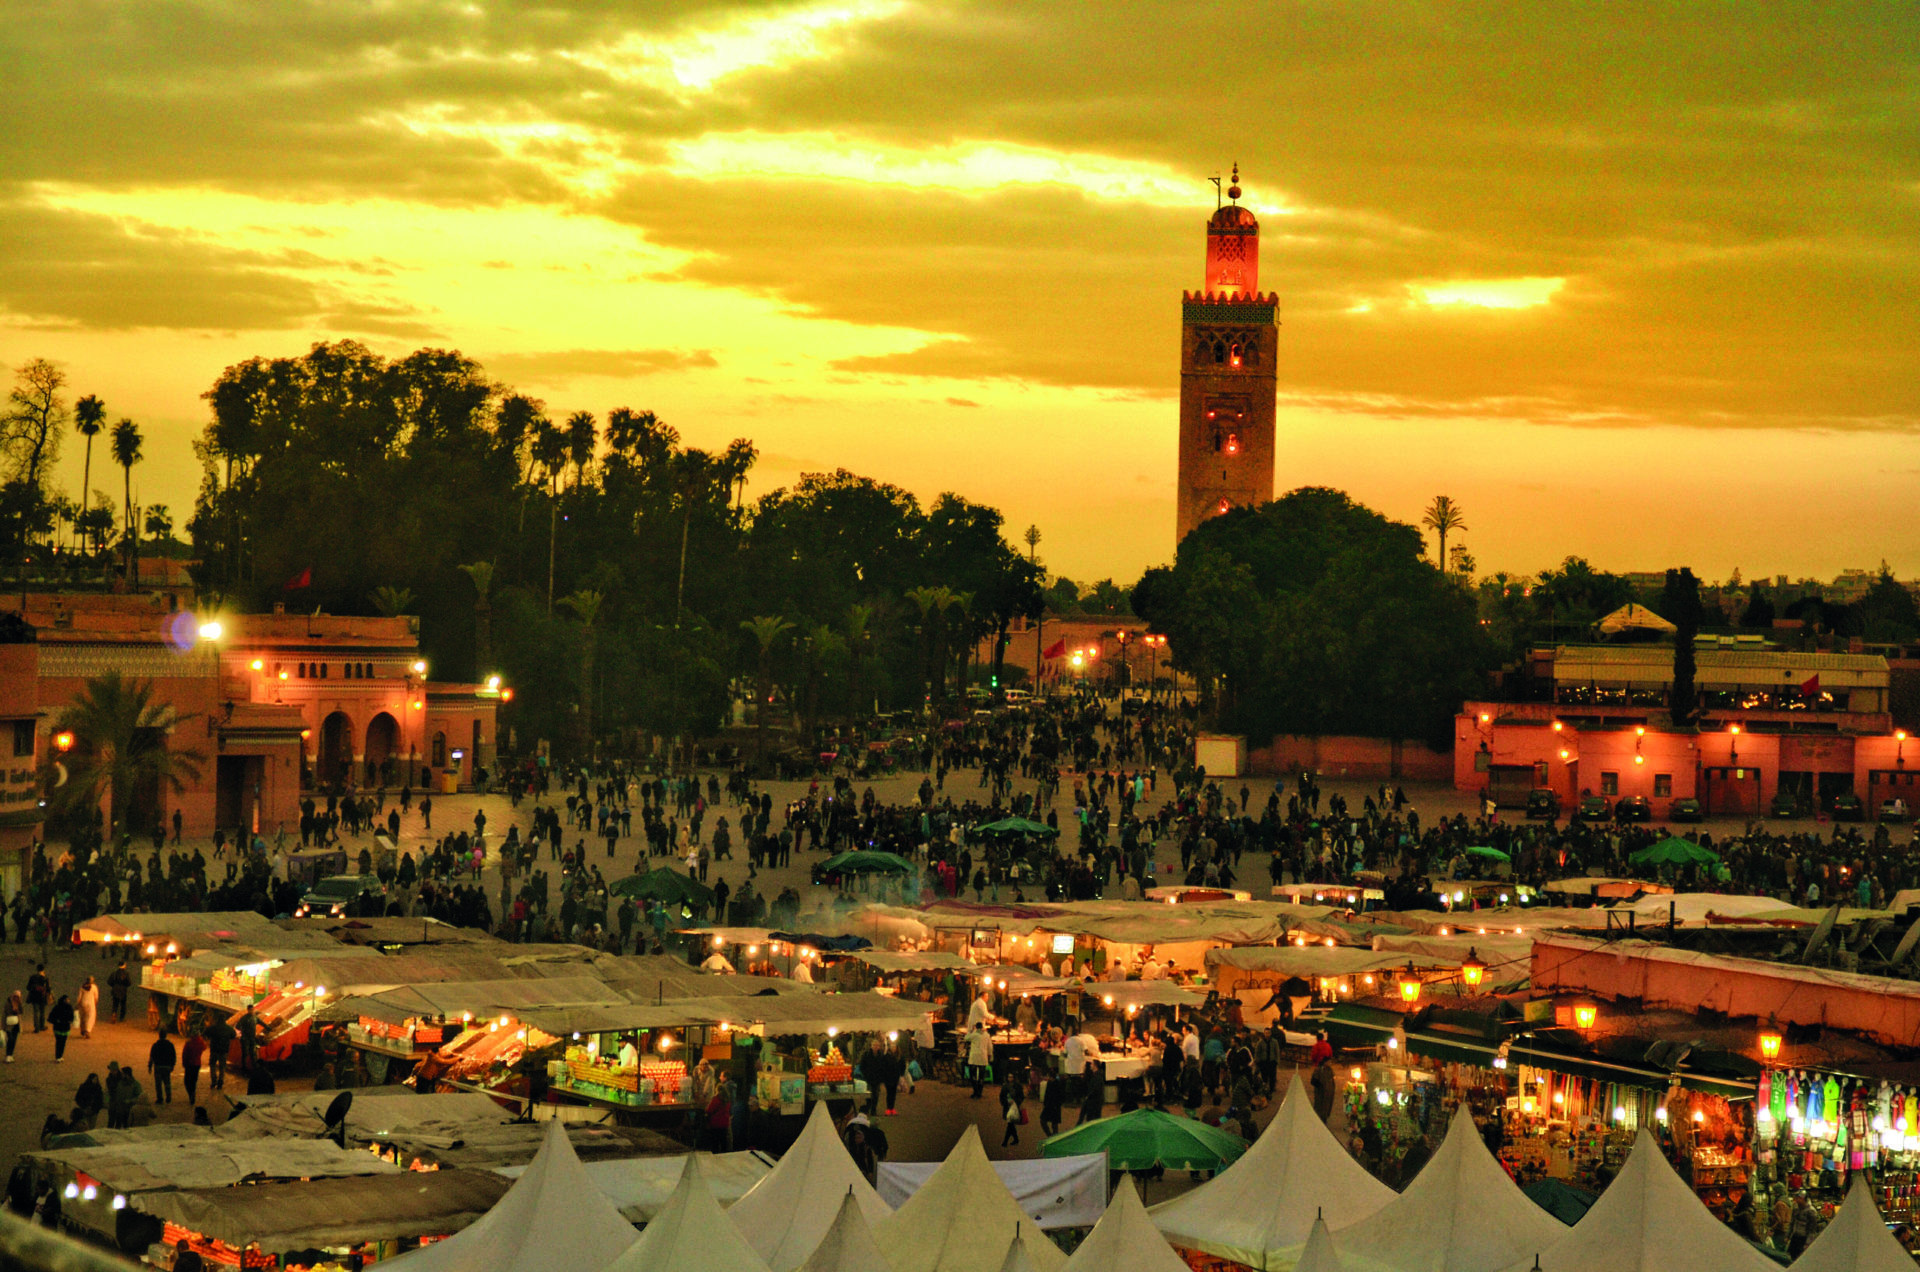 Djemaa El Fna Square. The most famous place in Marrakech.